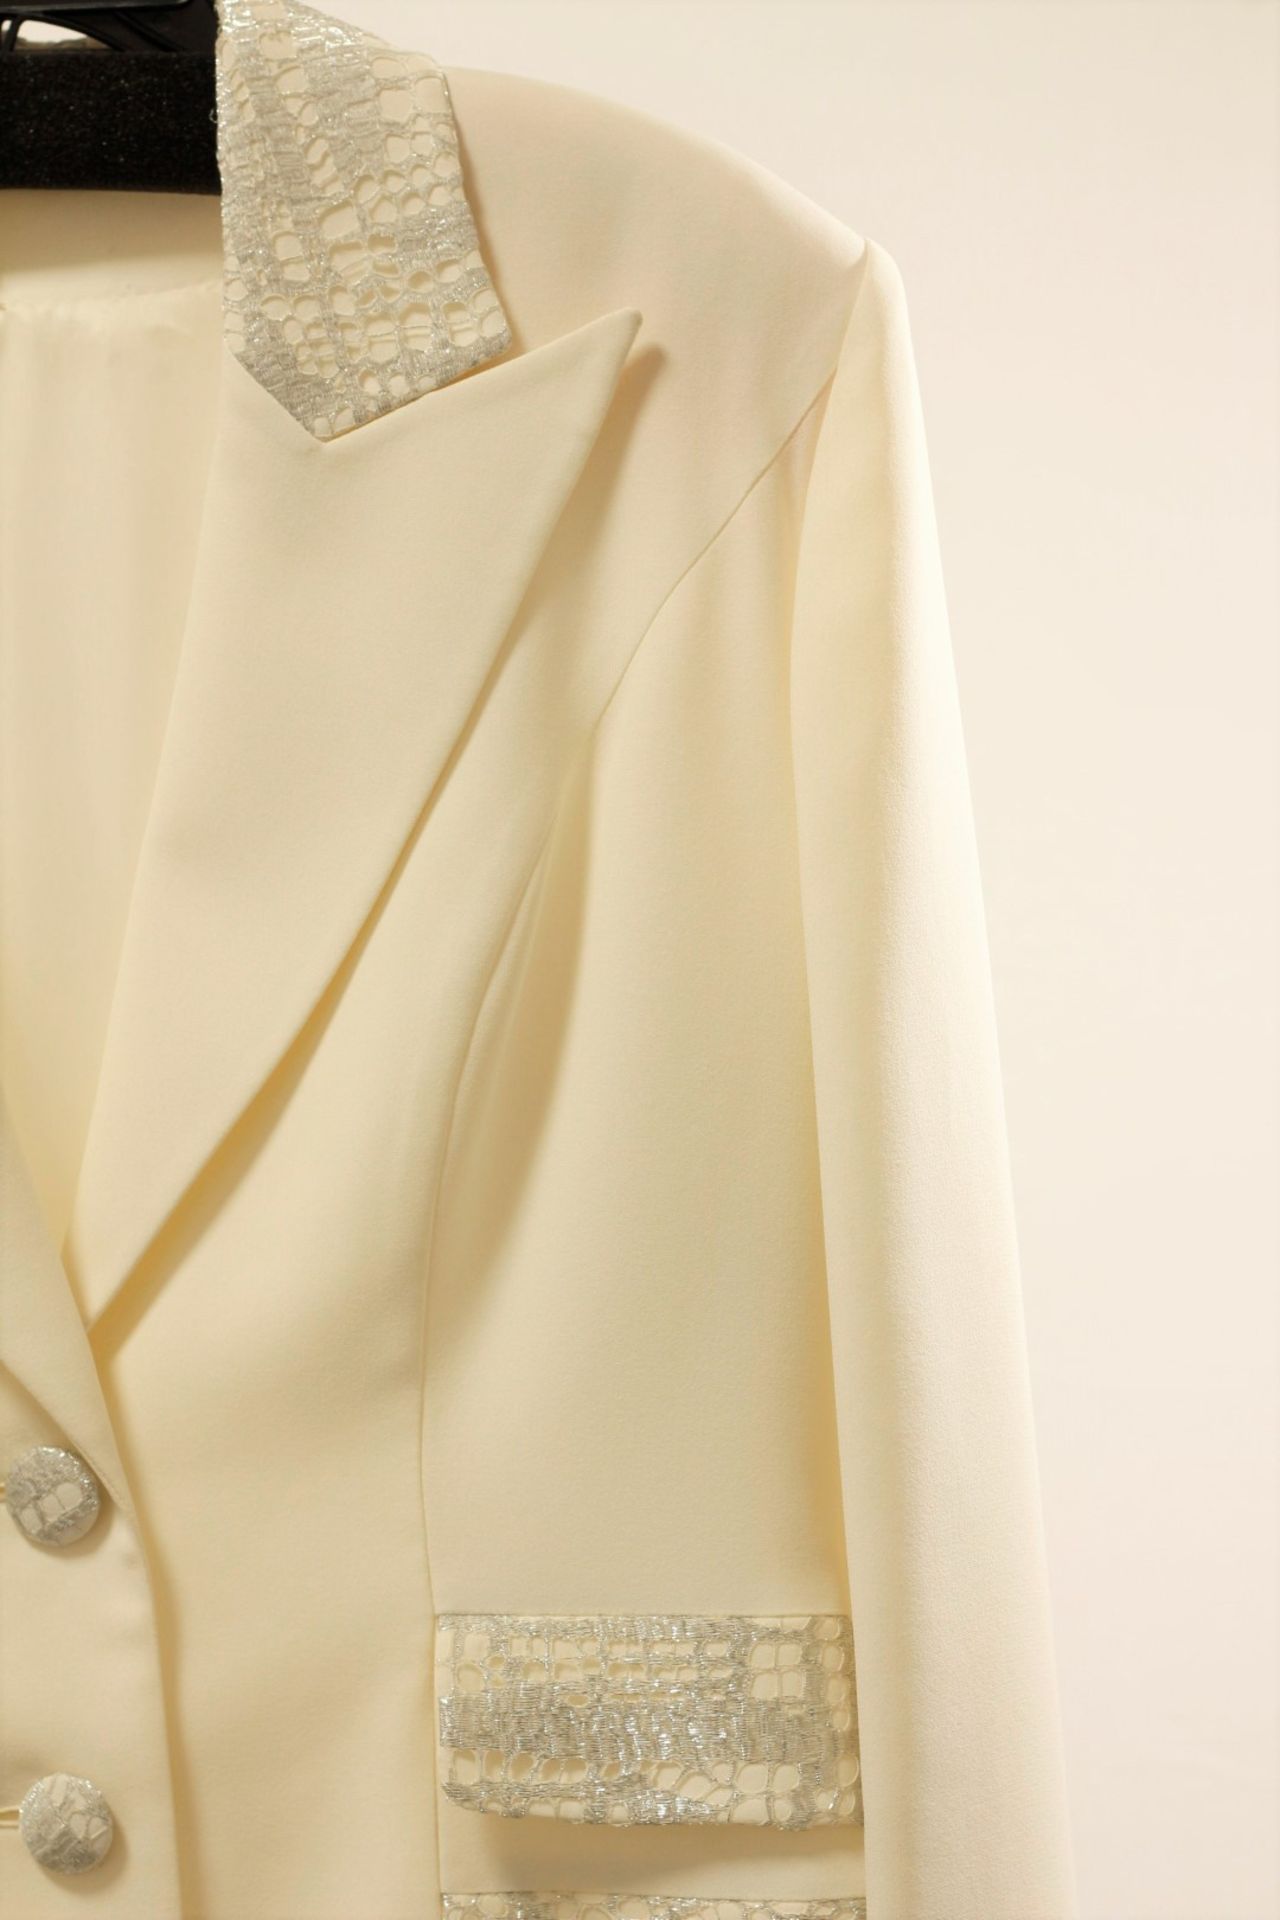 1 x Boutique Le Duc Cream Jacket - Size: 16 - Material: 52% Viscose, 48% Acetate - From a High End - Image 10 of 17